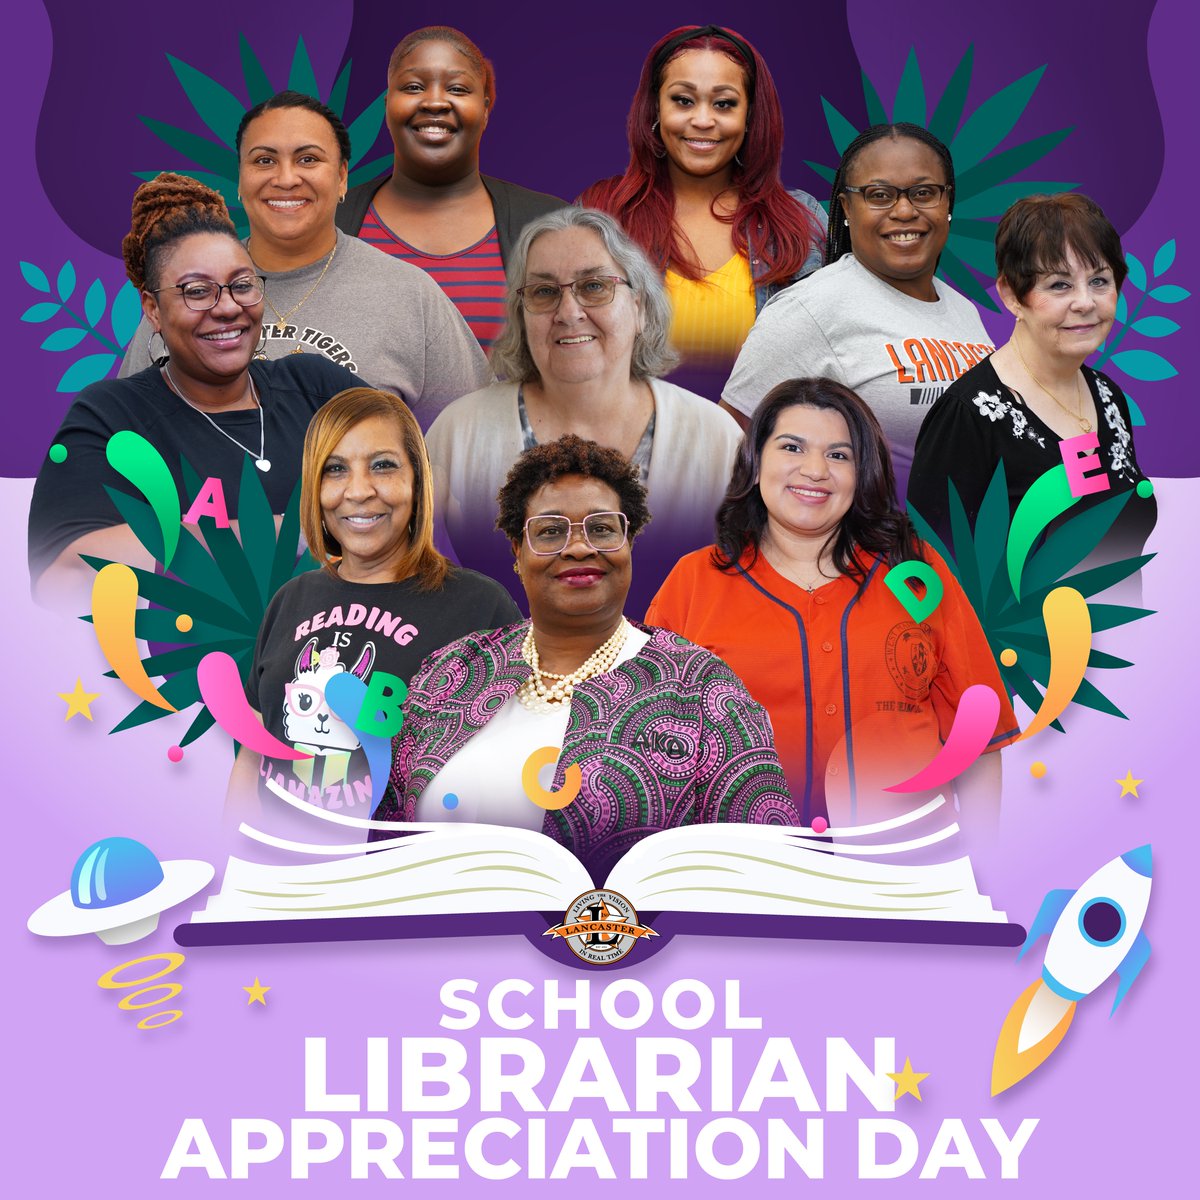 Today is #SchoolLibrarianAppreciationDay! School librarians are essential for student success. They work to connect students with resources and encourage their love of reading. Thank you to all Lancaster ISD librarians! Be sure to thank a librarian today! #TigerUp